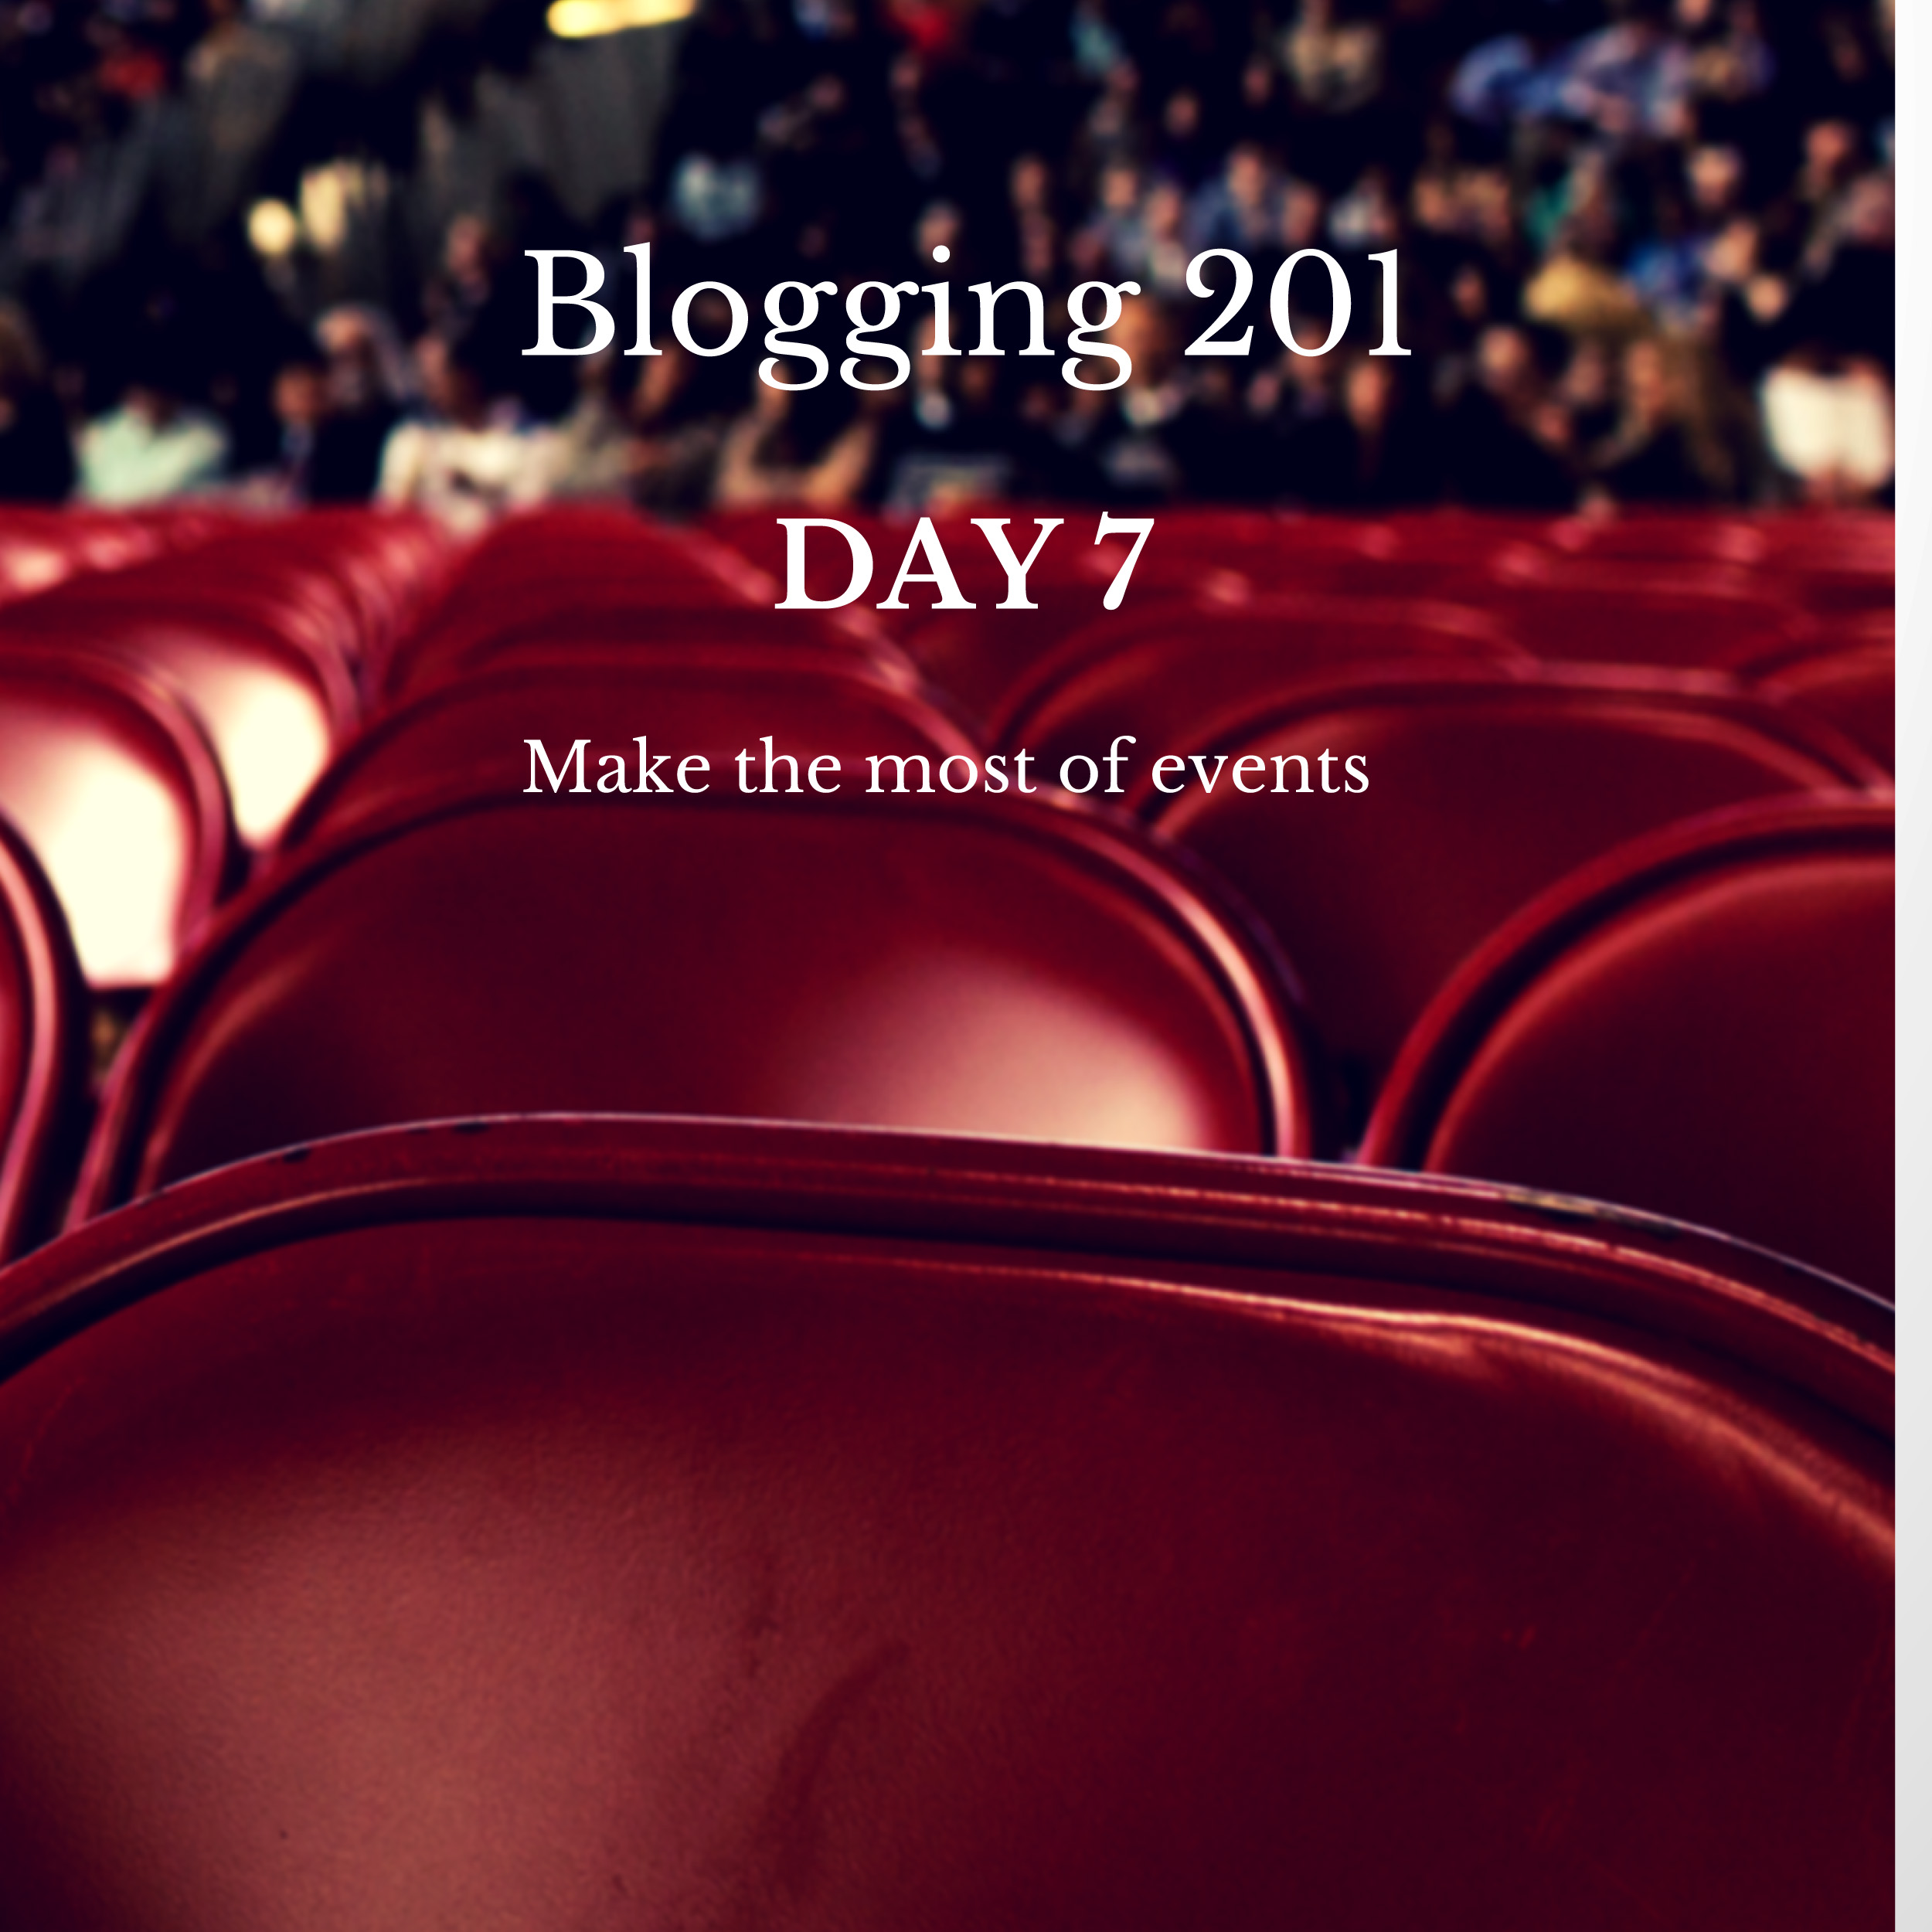 Blogging 201 day 7 make the most of events